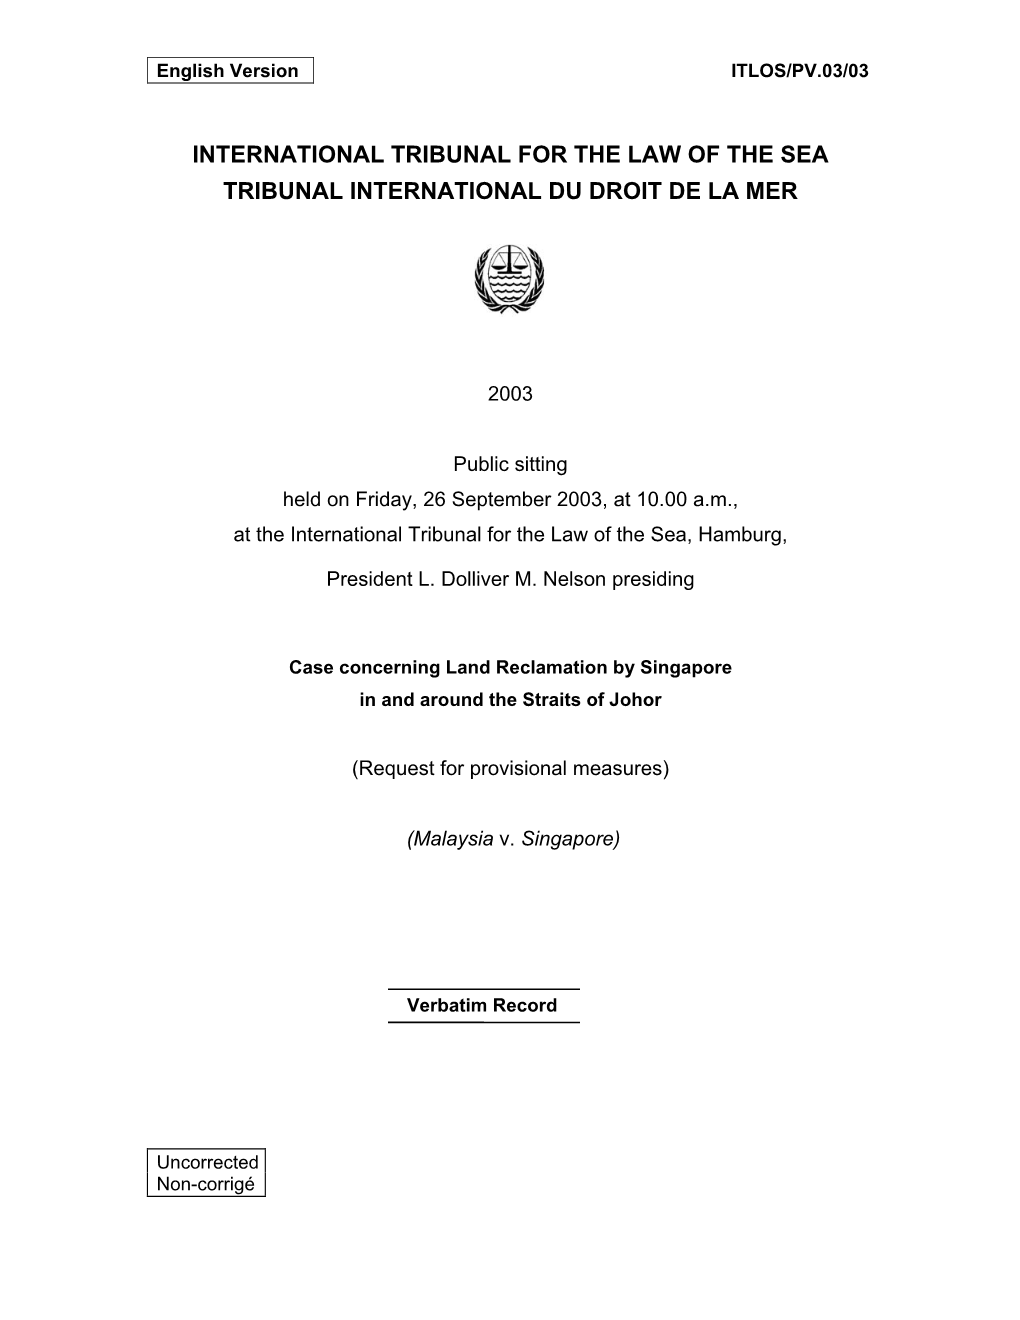 International Tribunal for the Law of the Sea Tribunal International Du Droit De La Mer